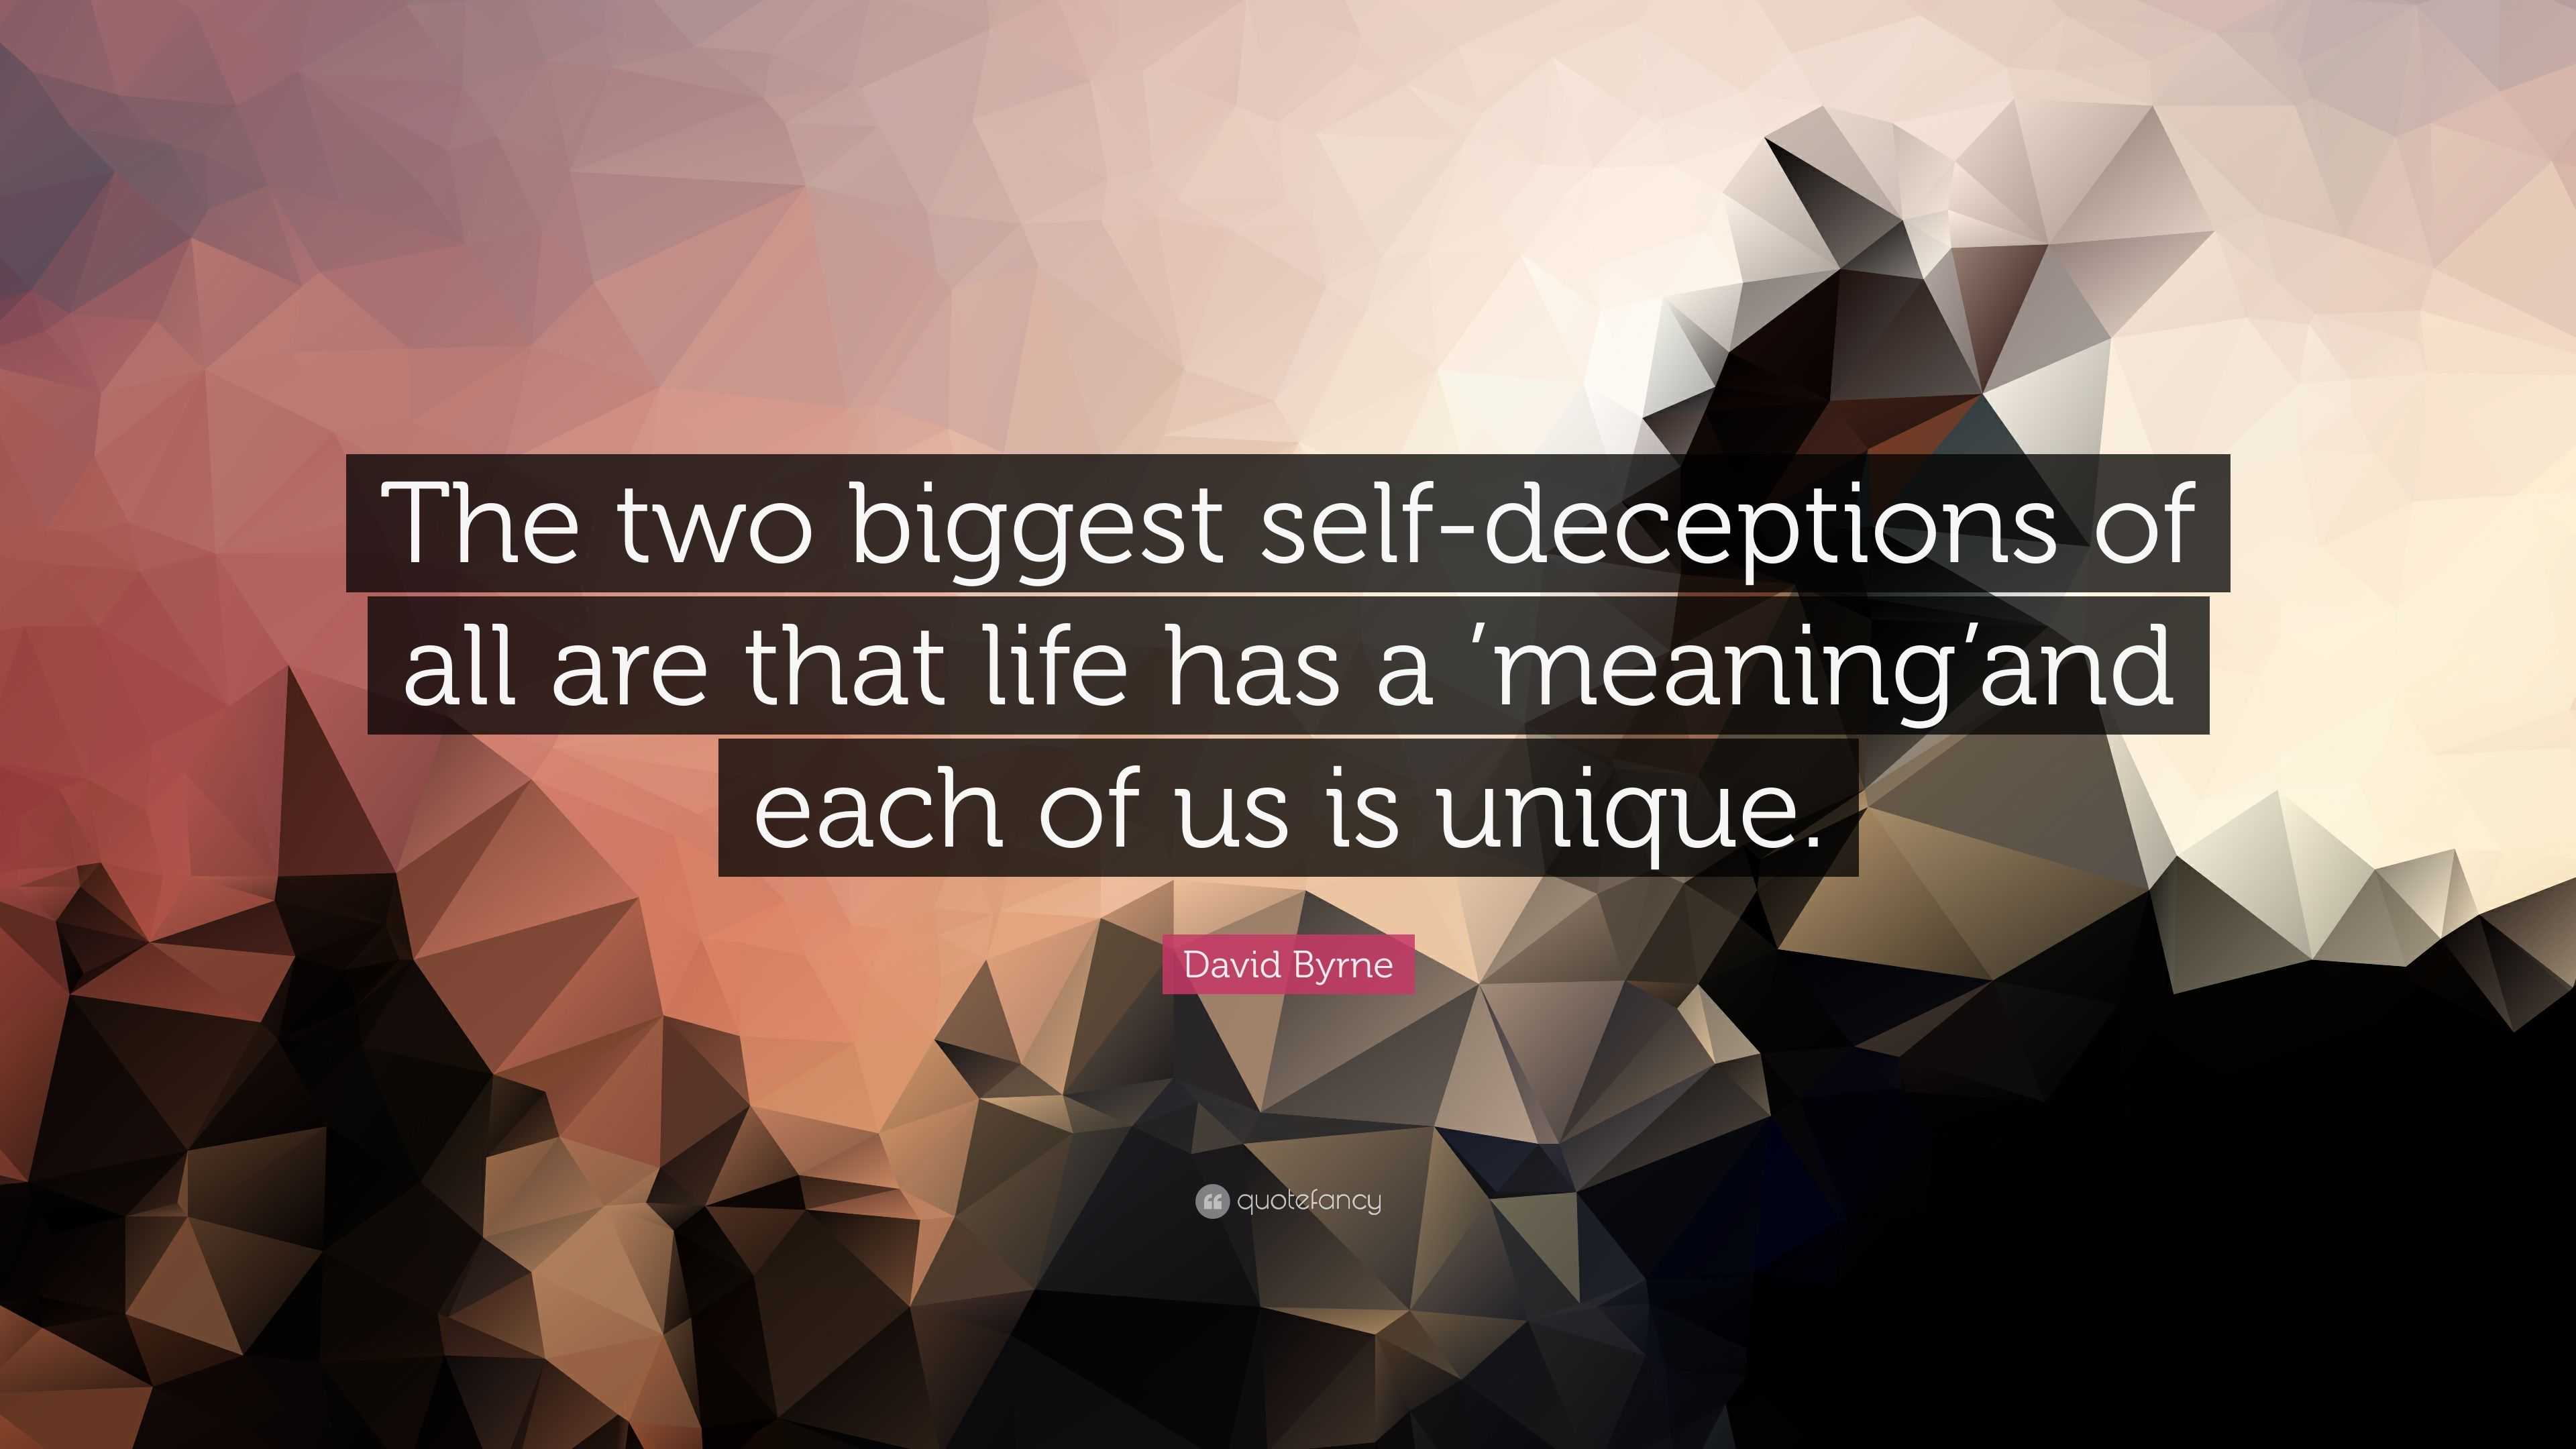 David Byrne Quote The Two Biggest Self Deceptions Of All Are That Life Has A Meaning And Each Of Us Is Unique 6 Wallpapers Quotefancy